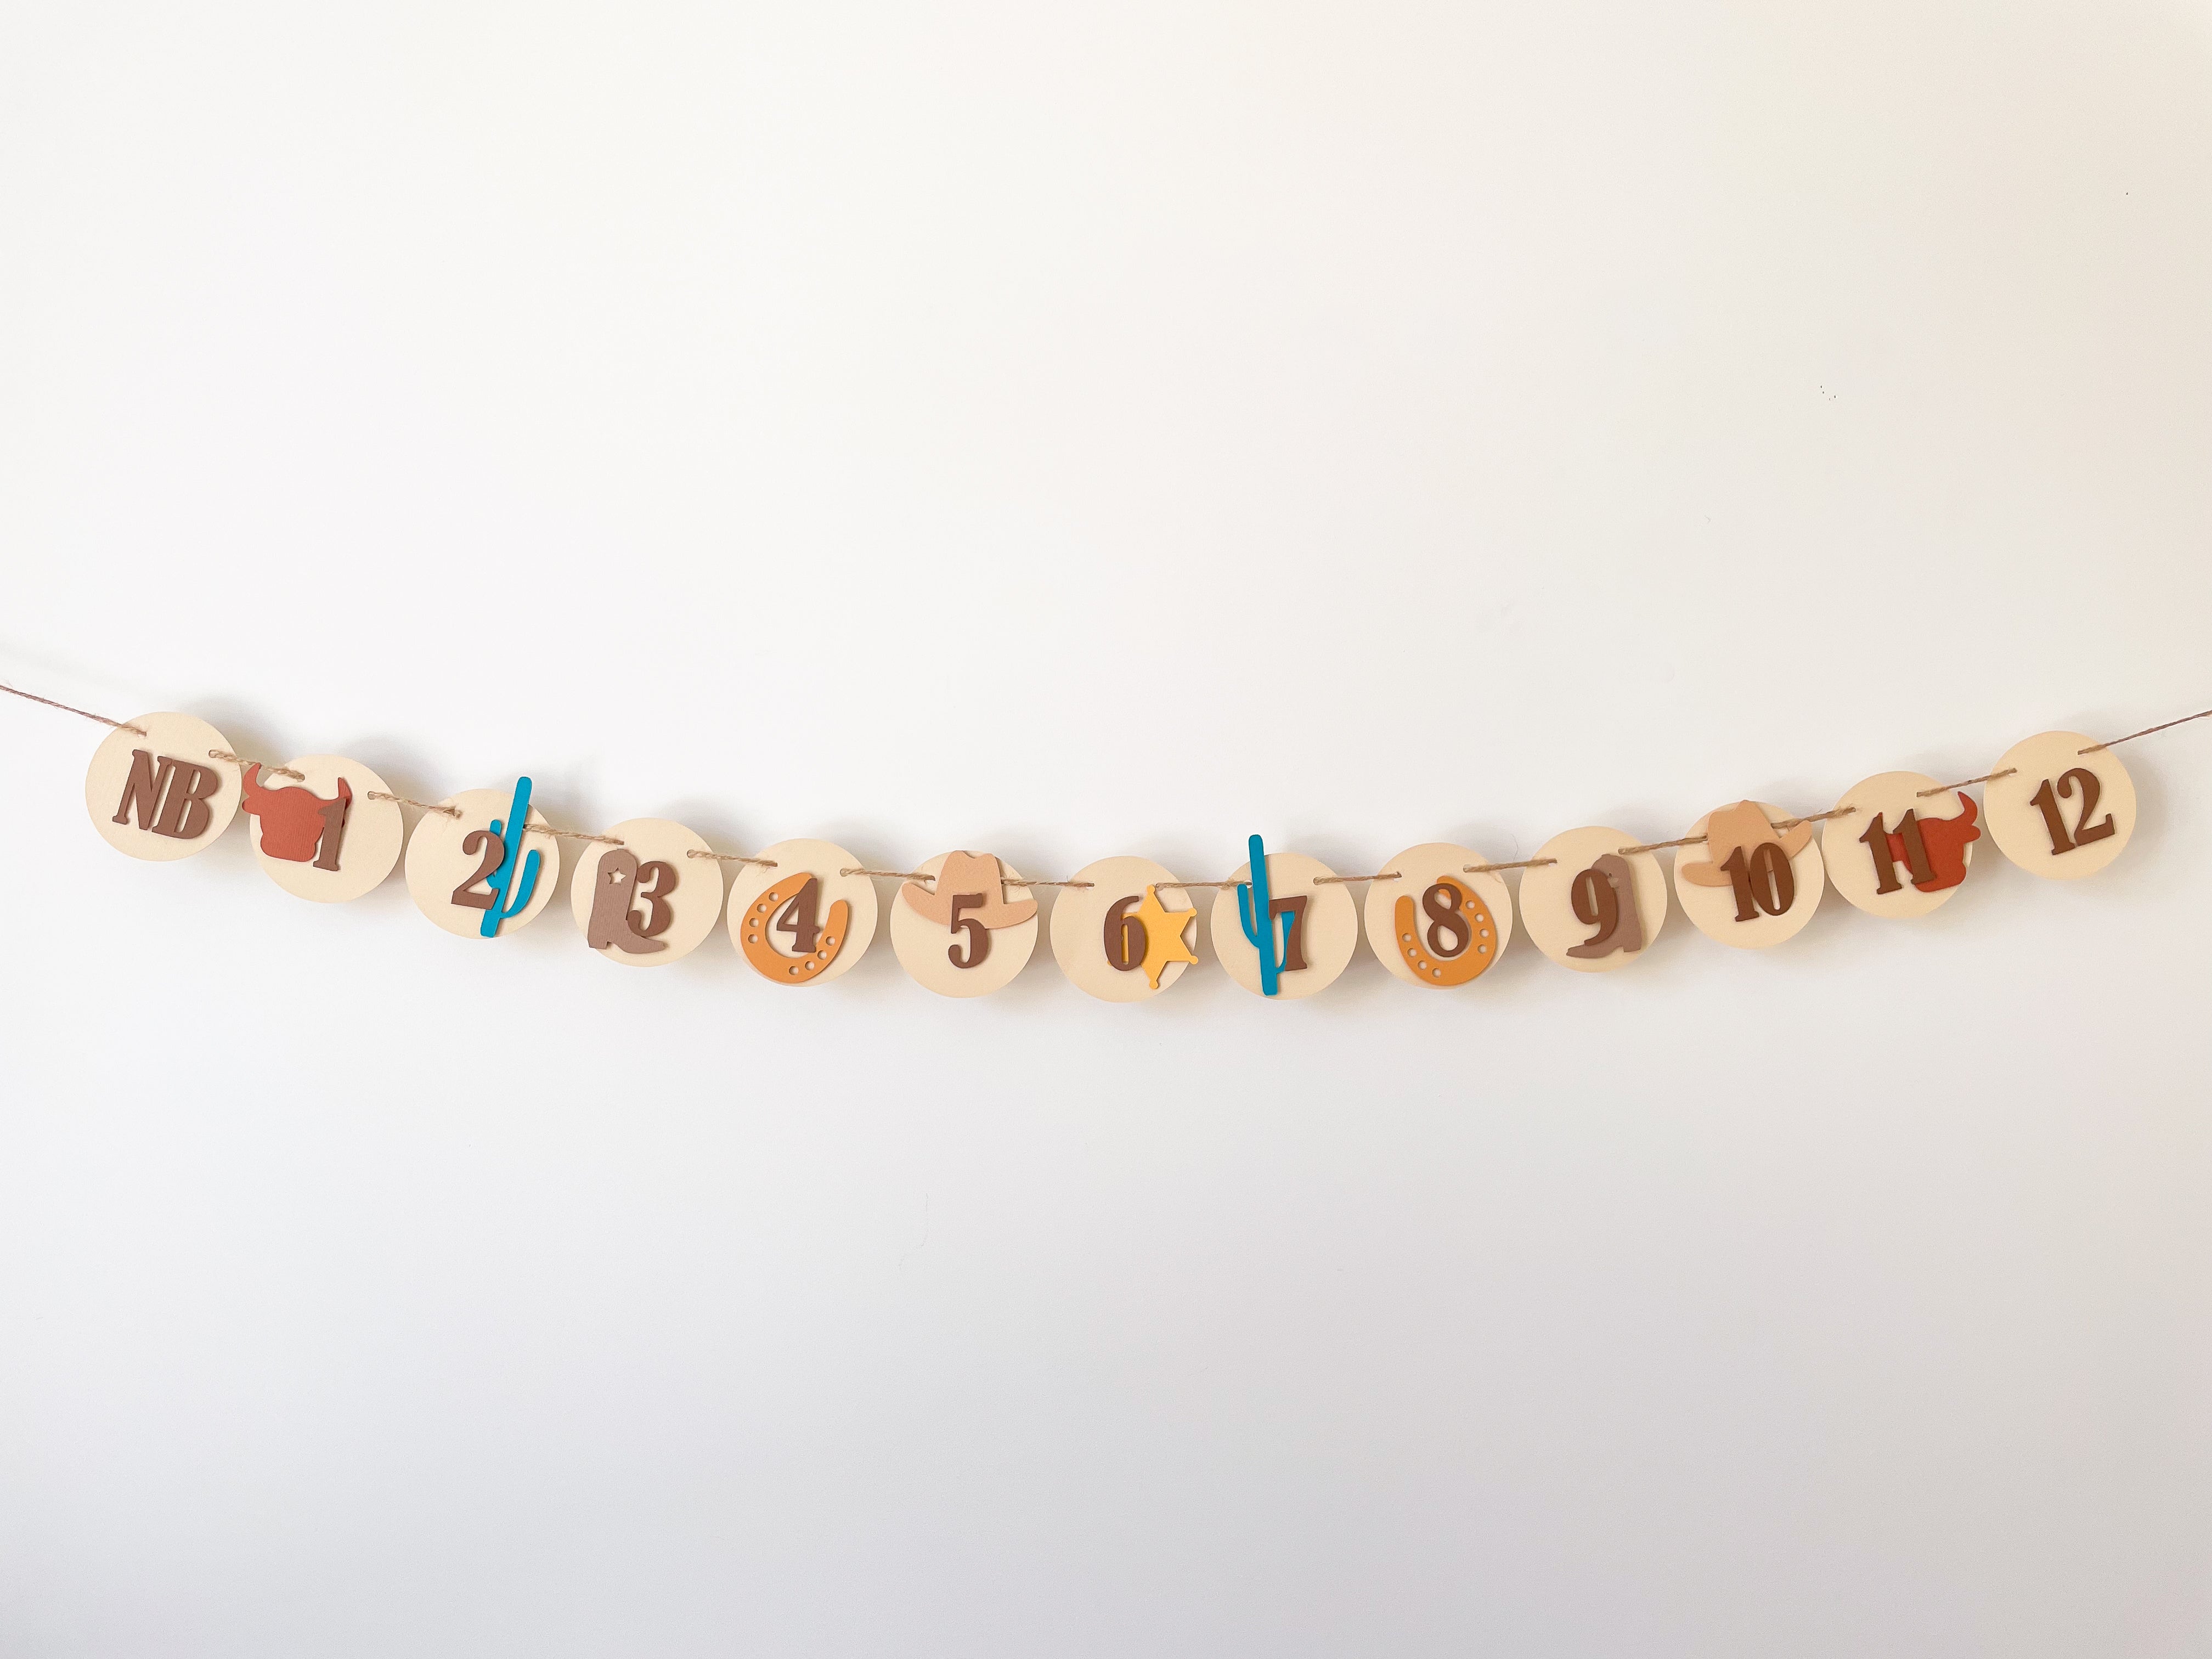 Cowboy Rodeo 12 Month Photo Banner My First Rodeo Birthday Party Cowboy 1st Birthday Decorations Wild West Party Decor 